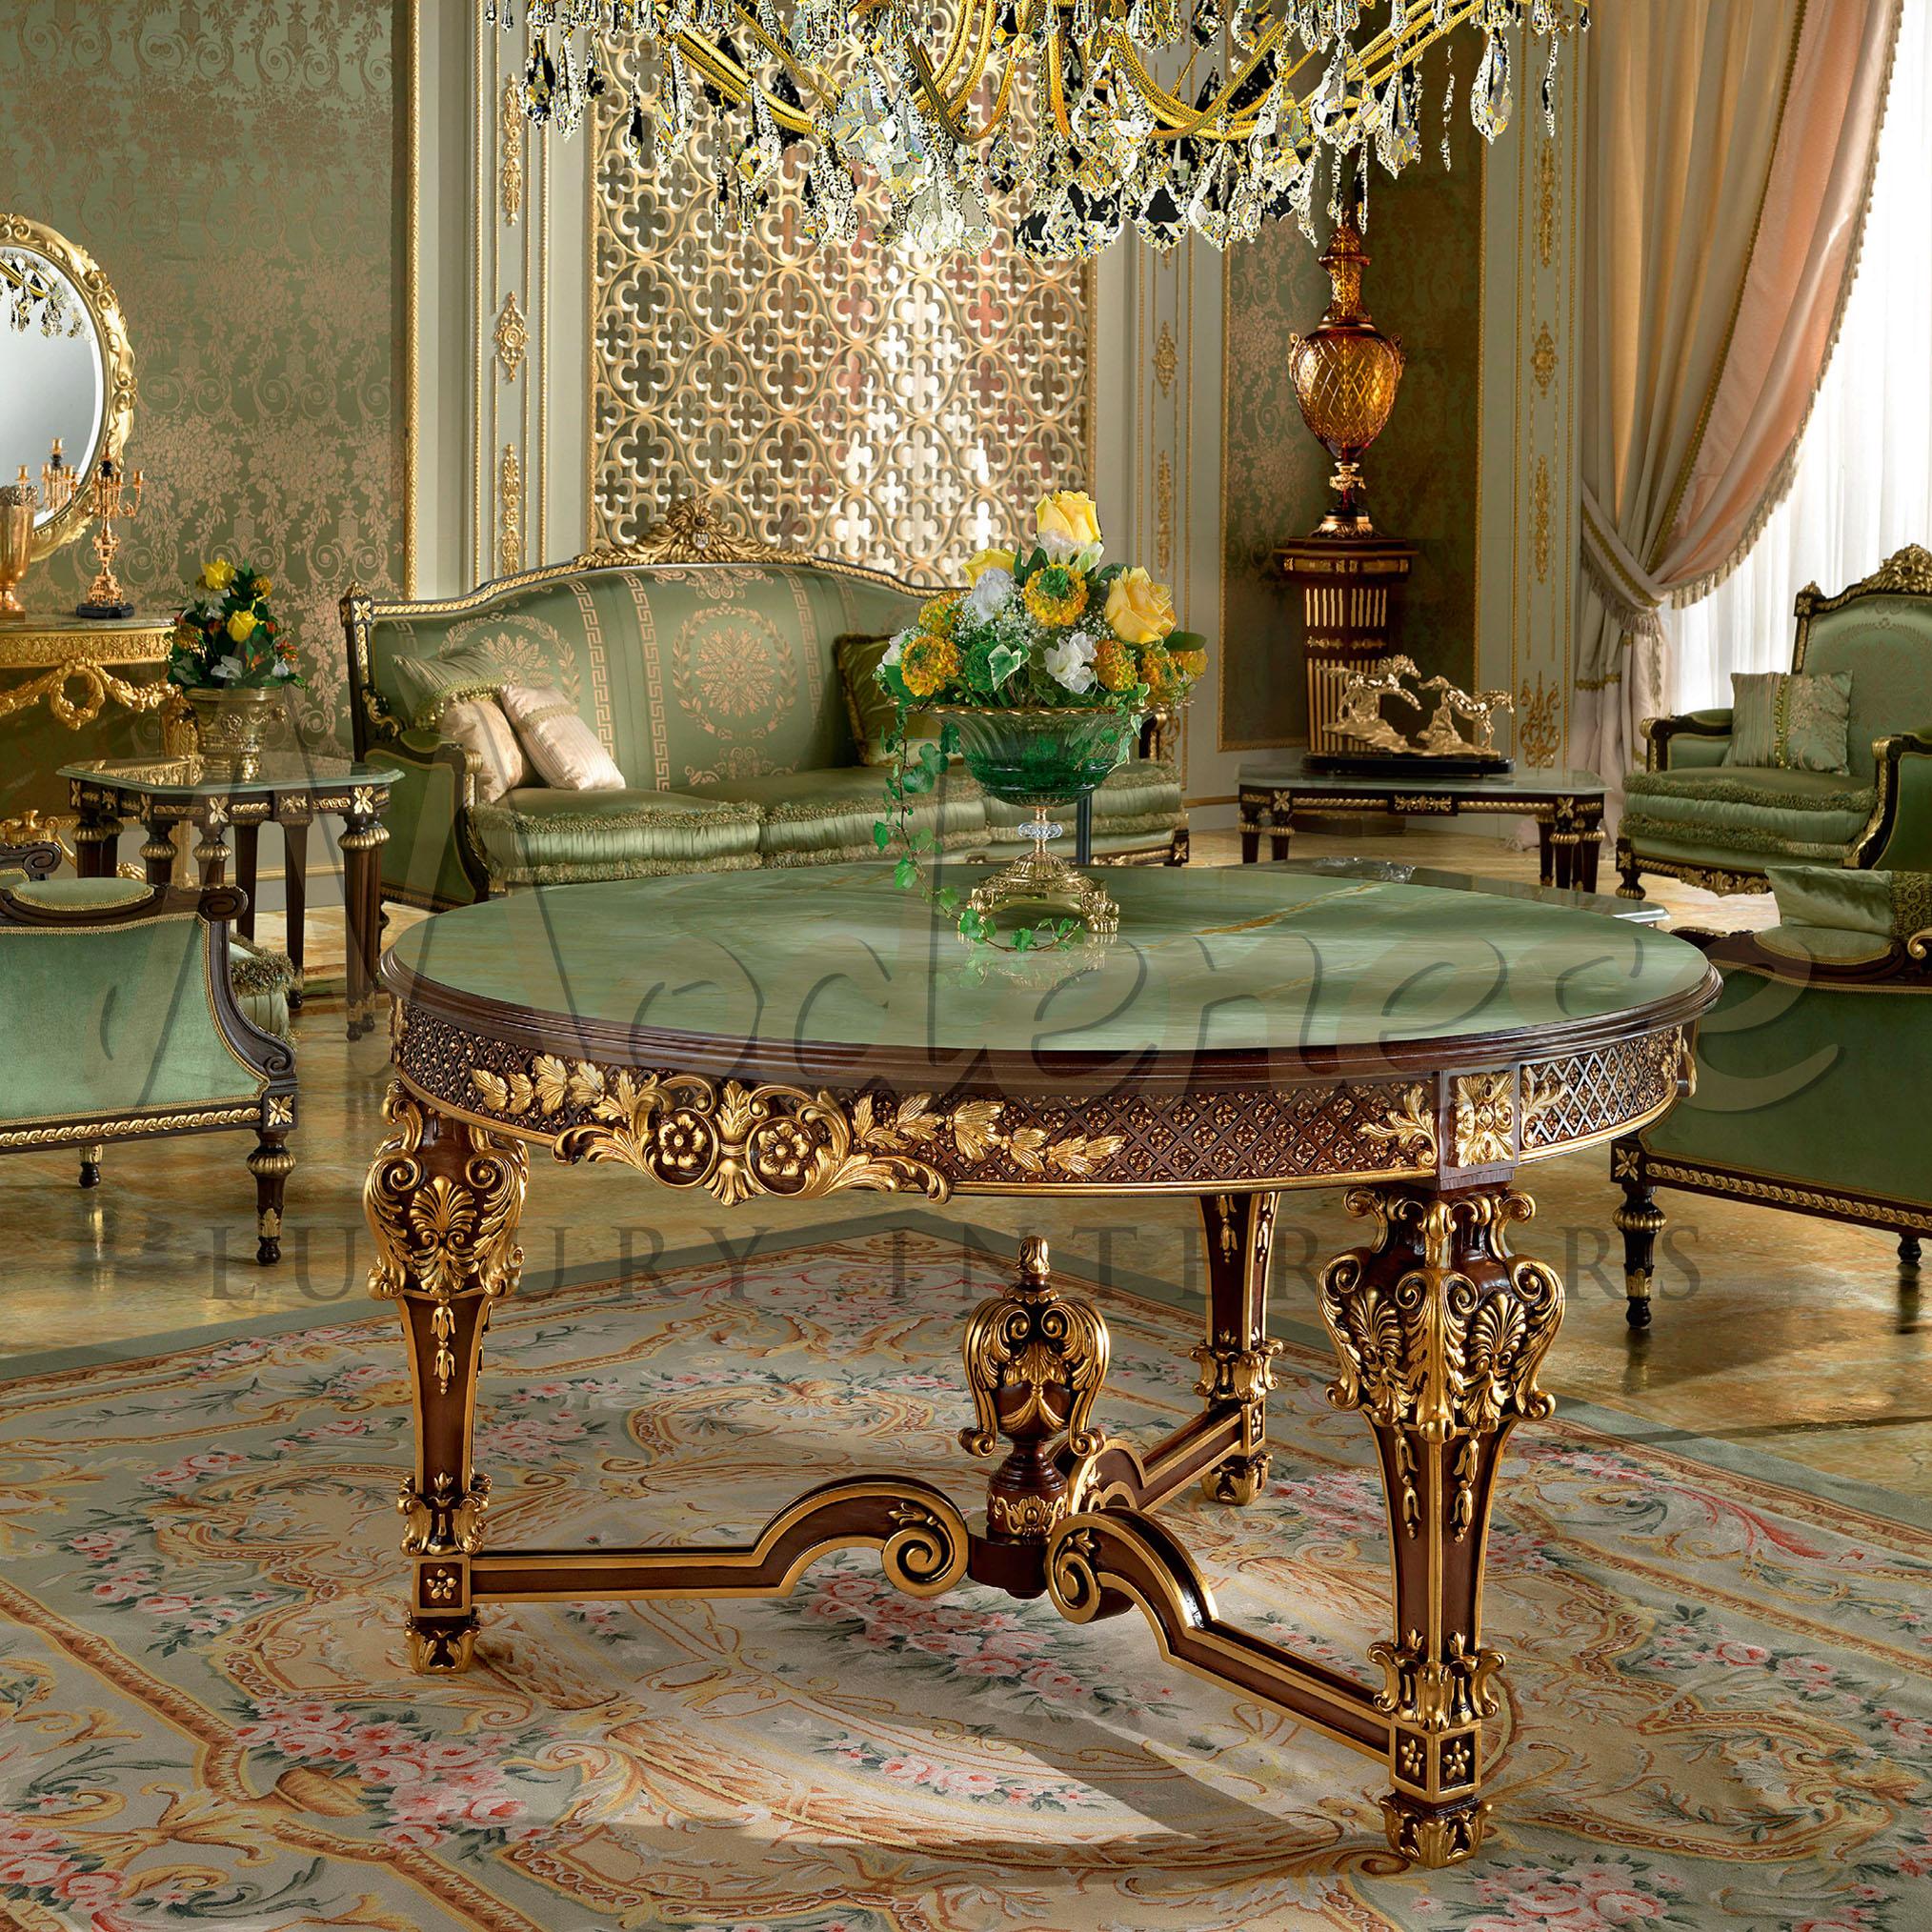 A decorative furniture item that will make the difference, this round center table is not for everyone. Green beveled marble top, eight empire-style legs and walnut finish with gold leaf applications all over the carvings. So many secret details you